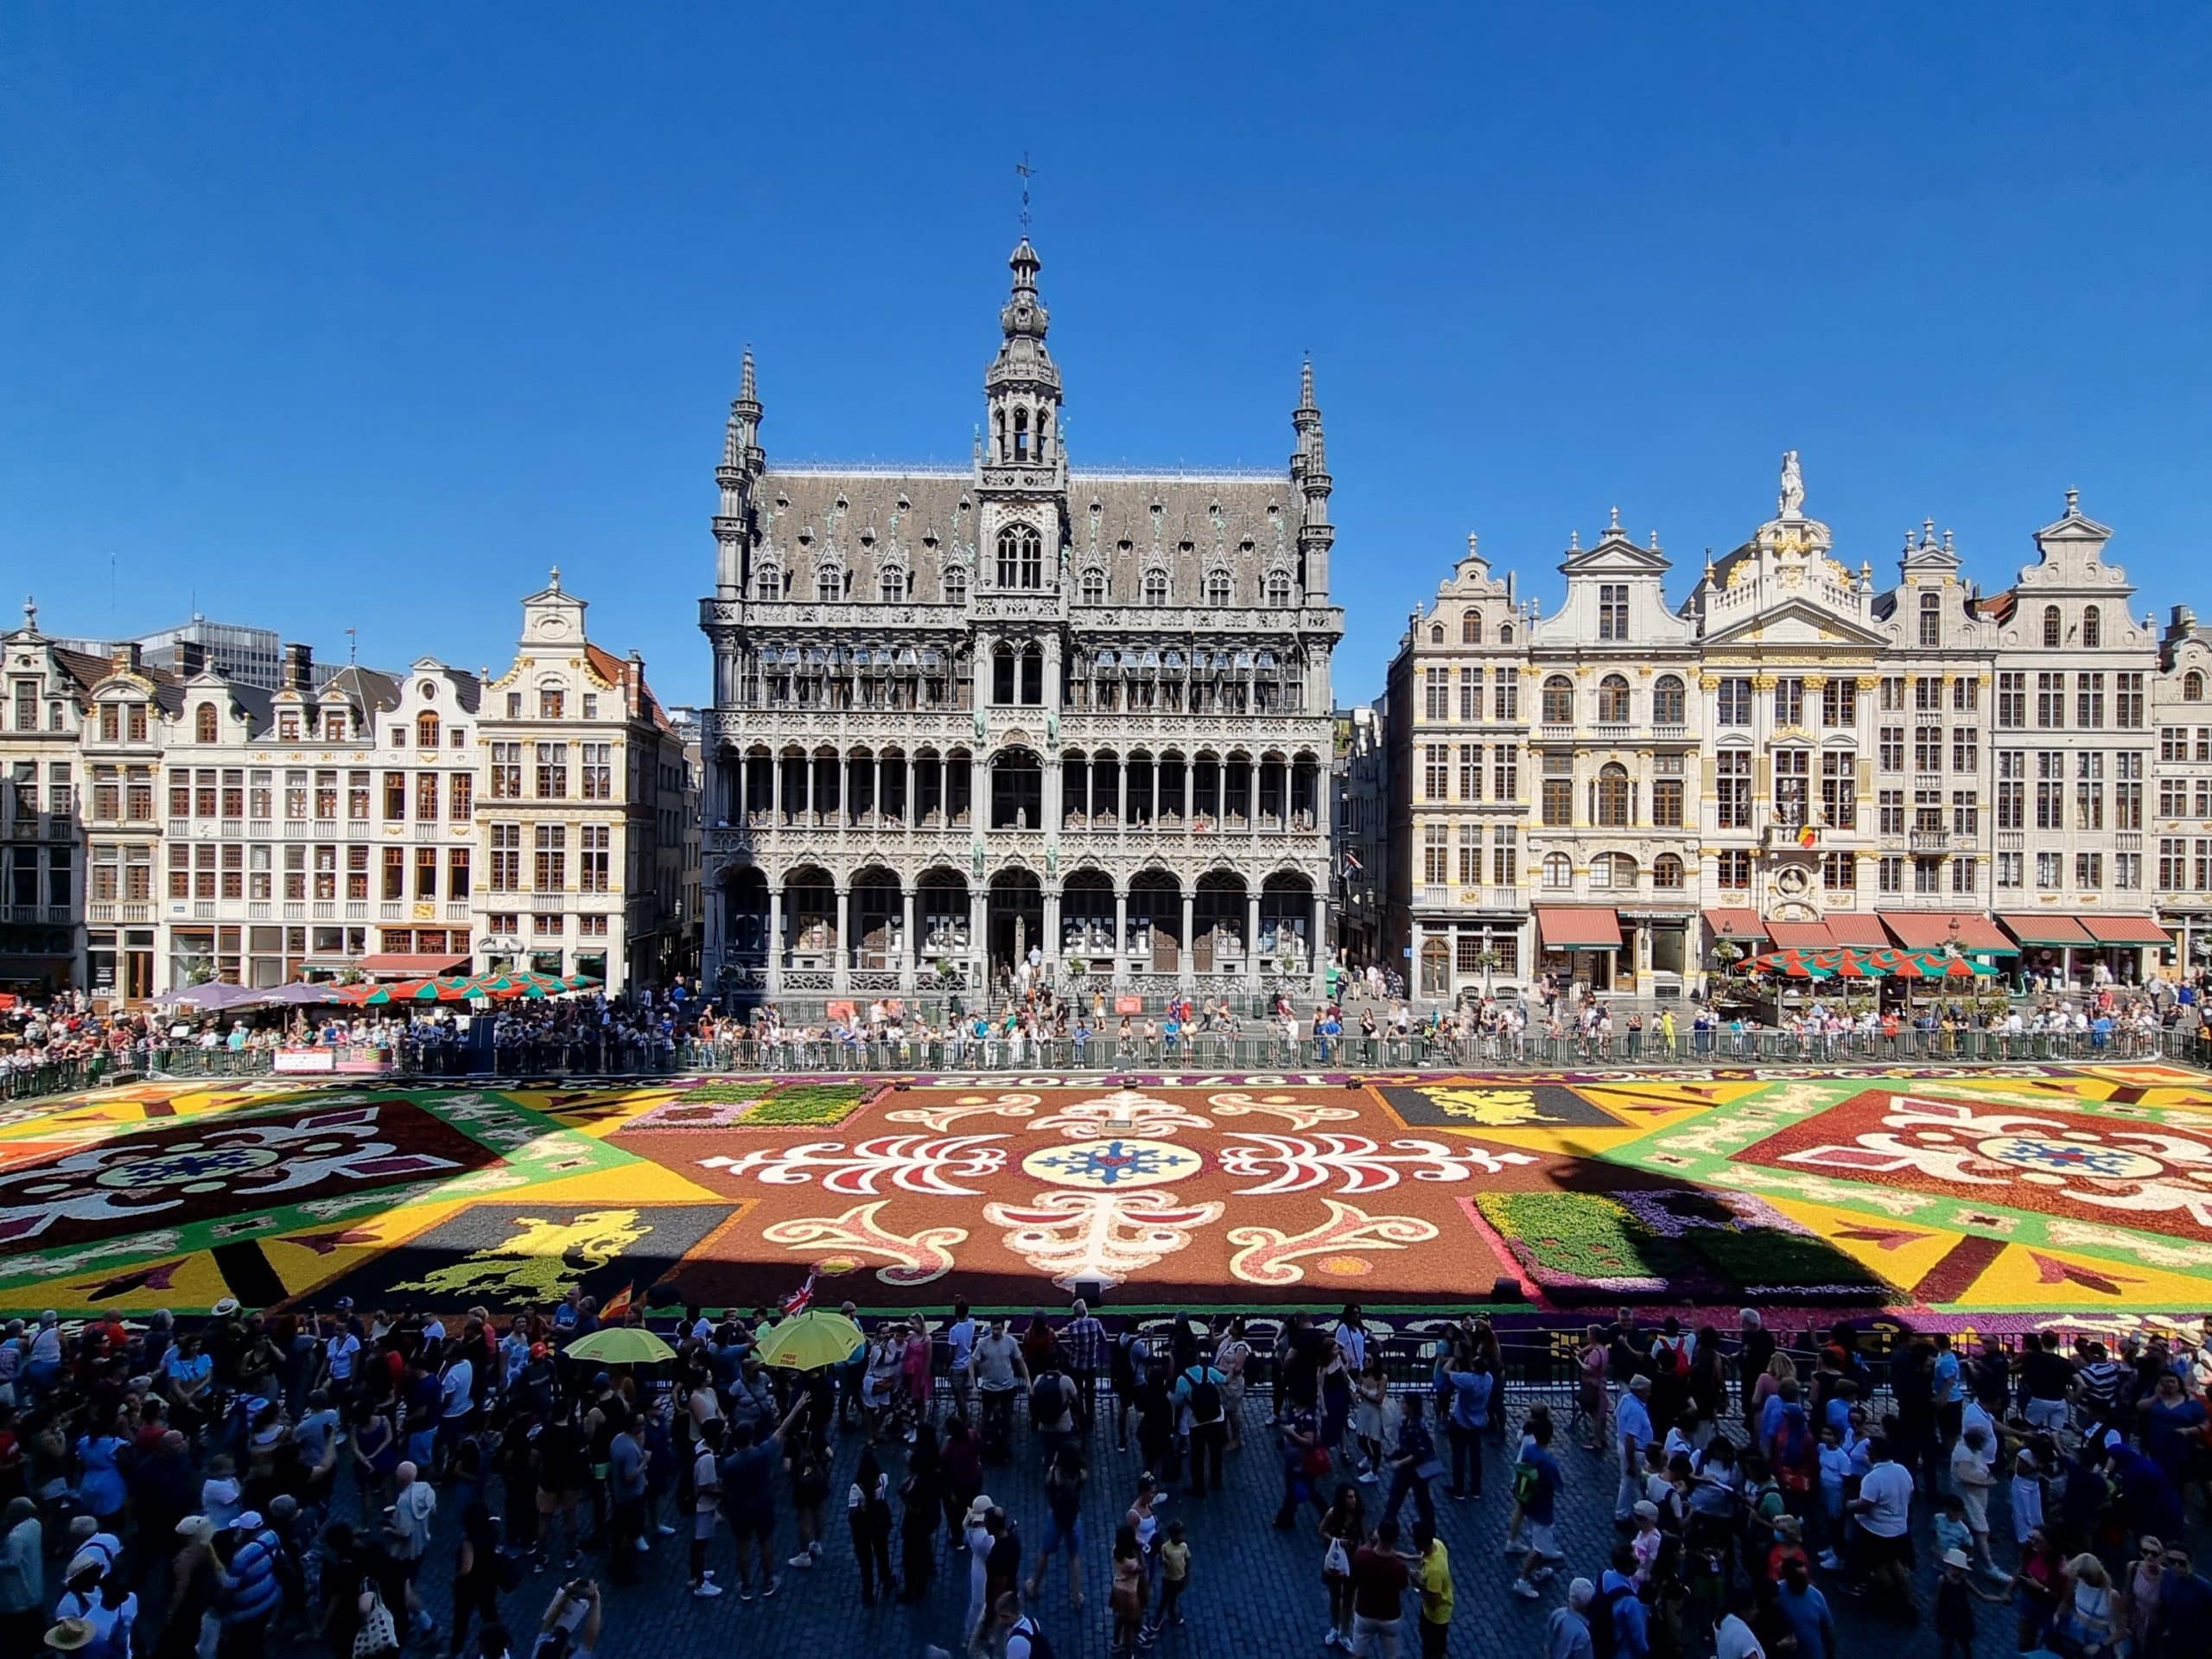 Brussels Grand Place